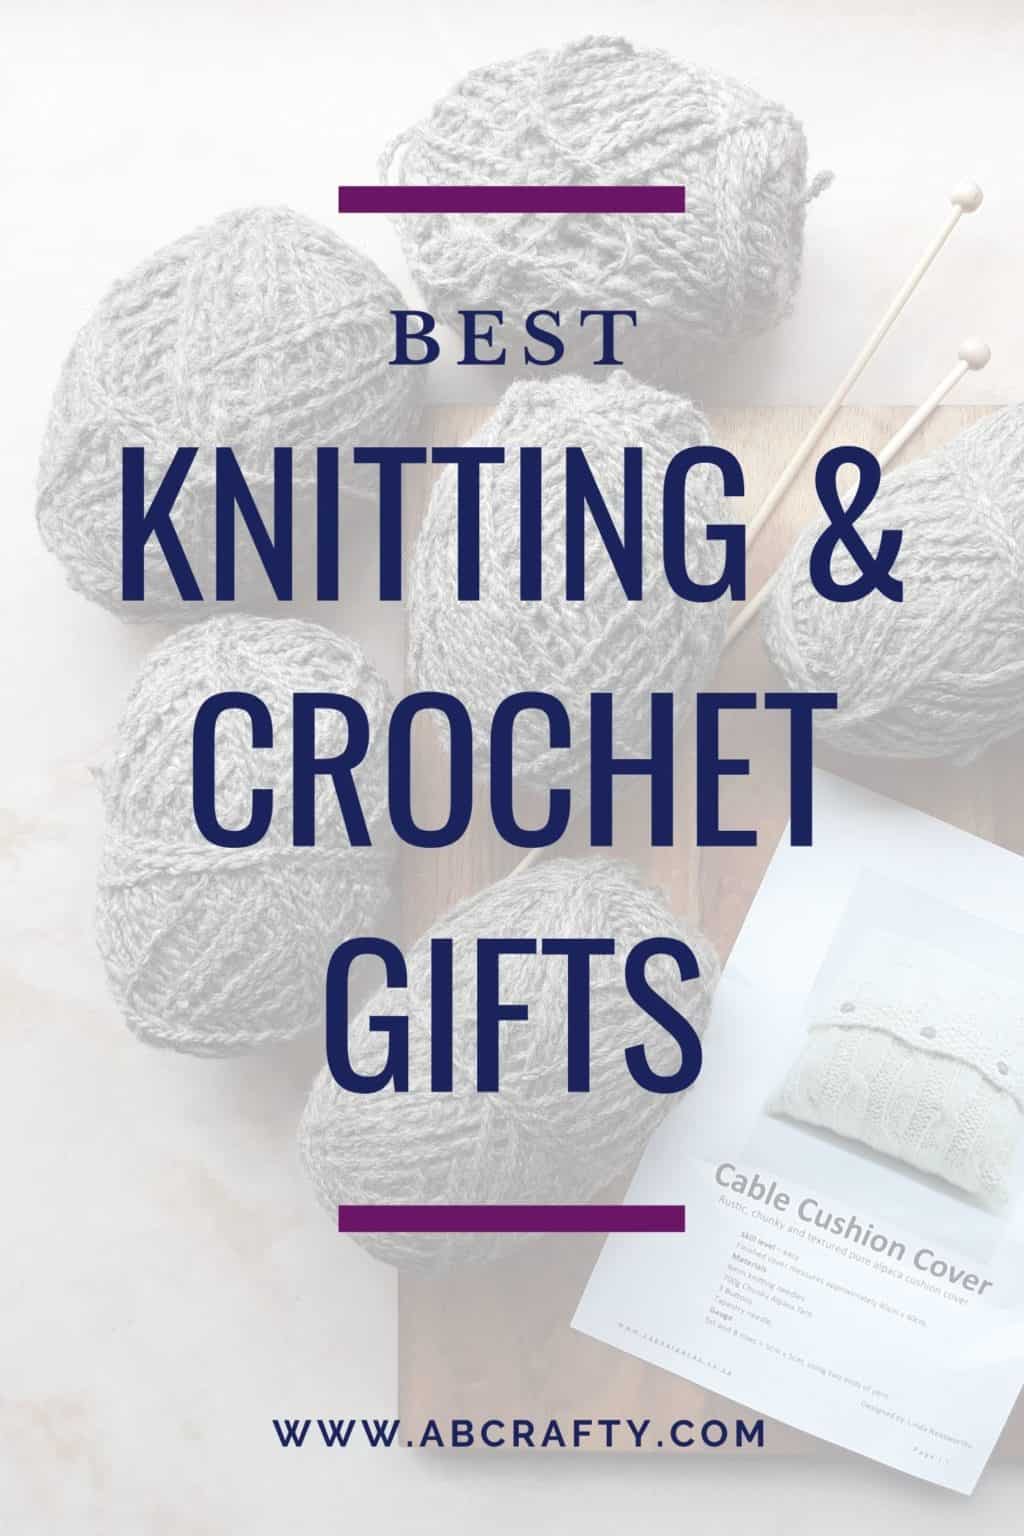 yarn, knitting needles, buttons, and a knitting pattern with the title "best knitting and crochet gifts"